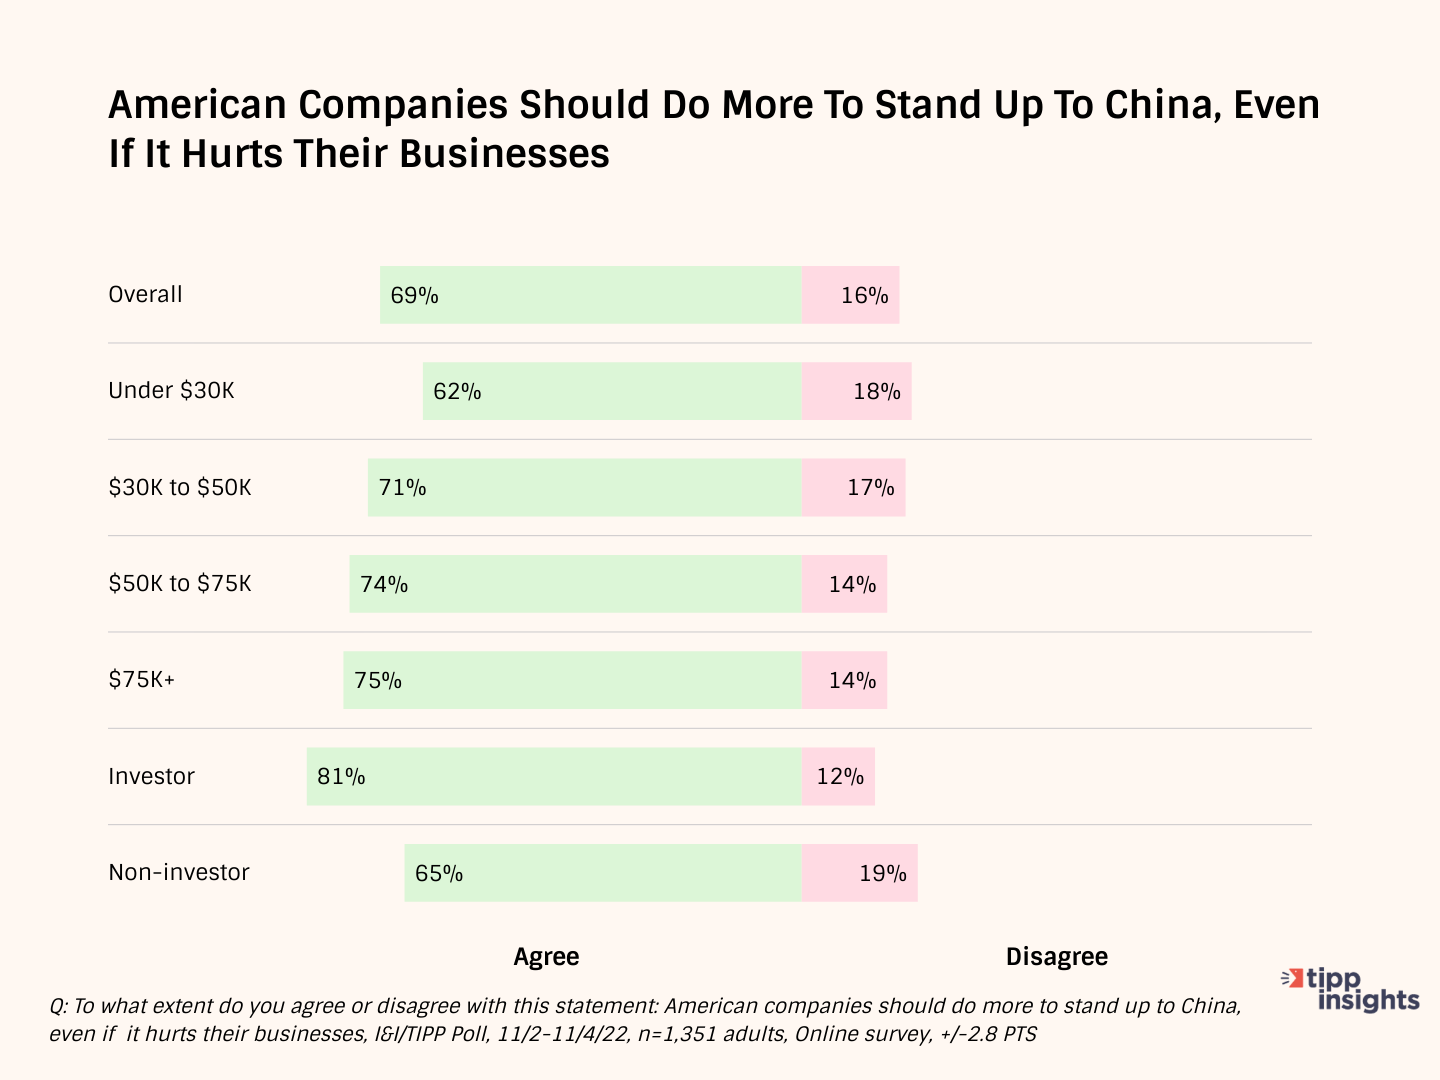 Americans Want U.S. Firms To ‘Stand Up’ To China: I&I/TIPP Poll